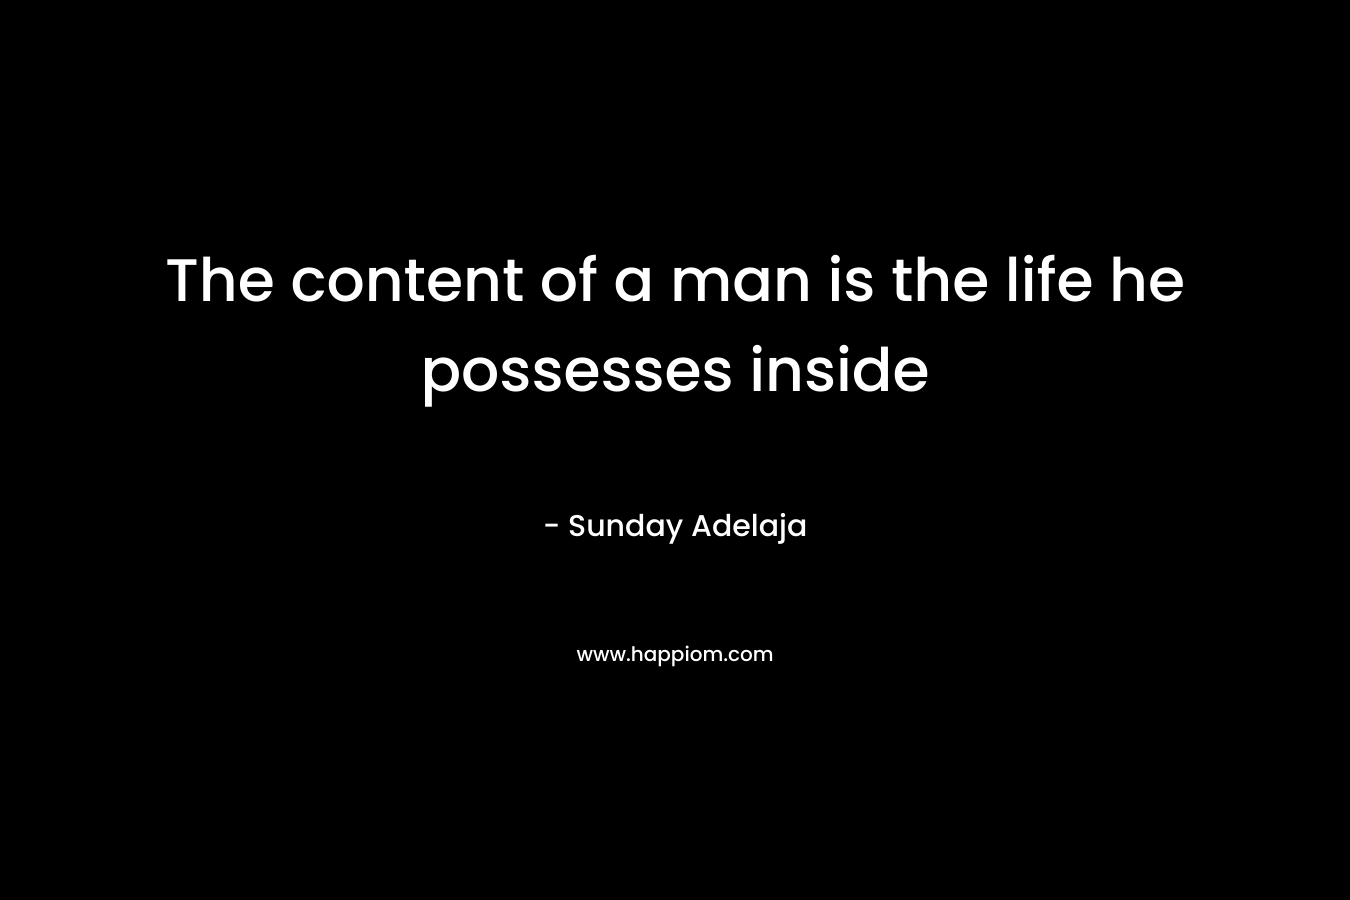 The content of a man is the life he possesses inside